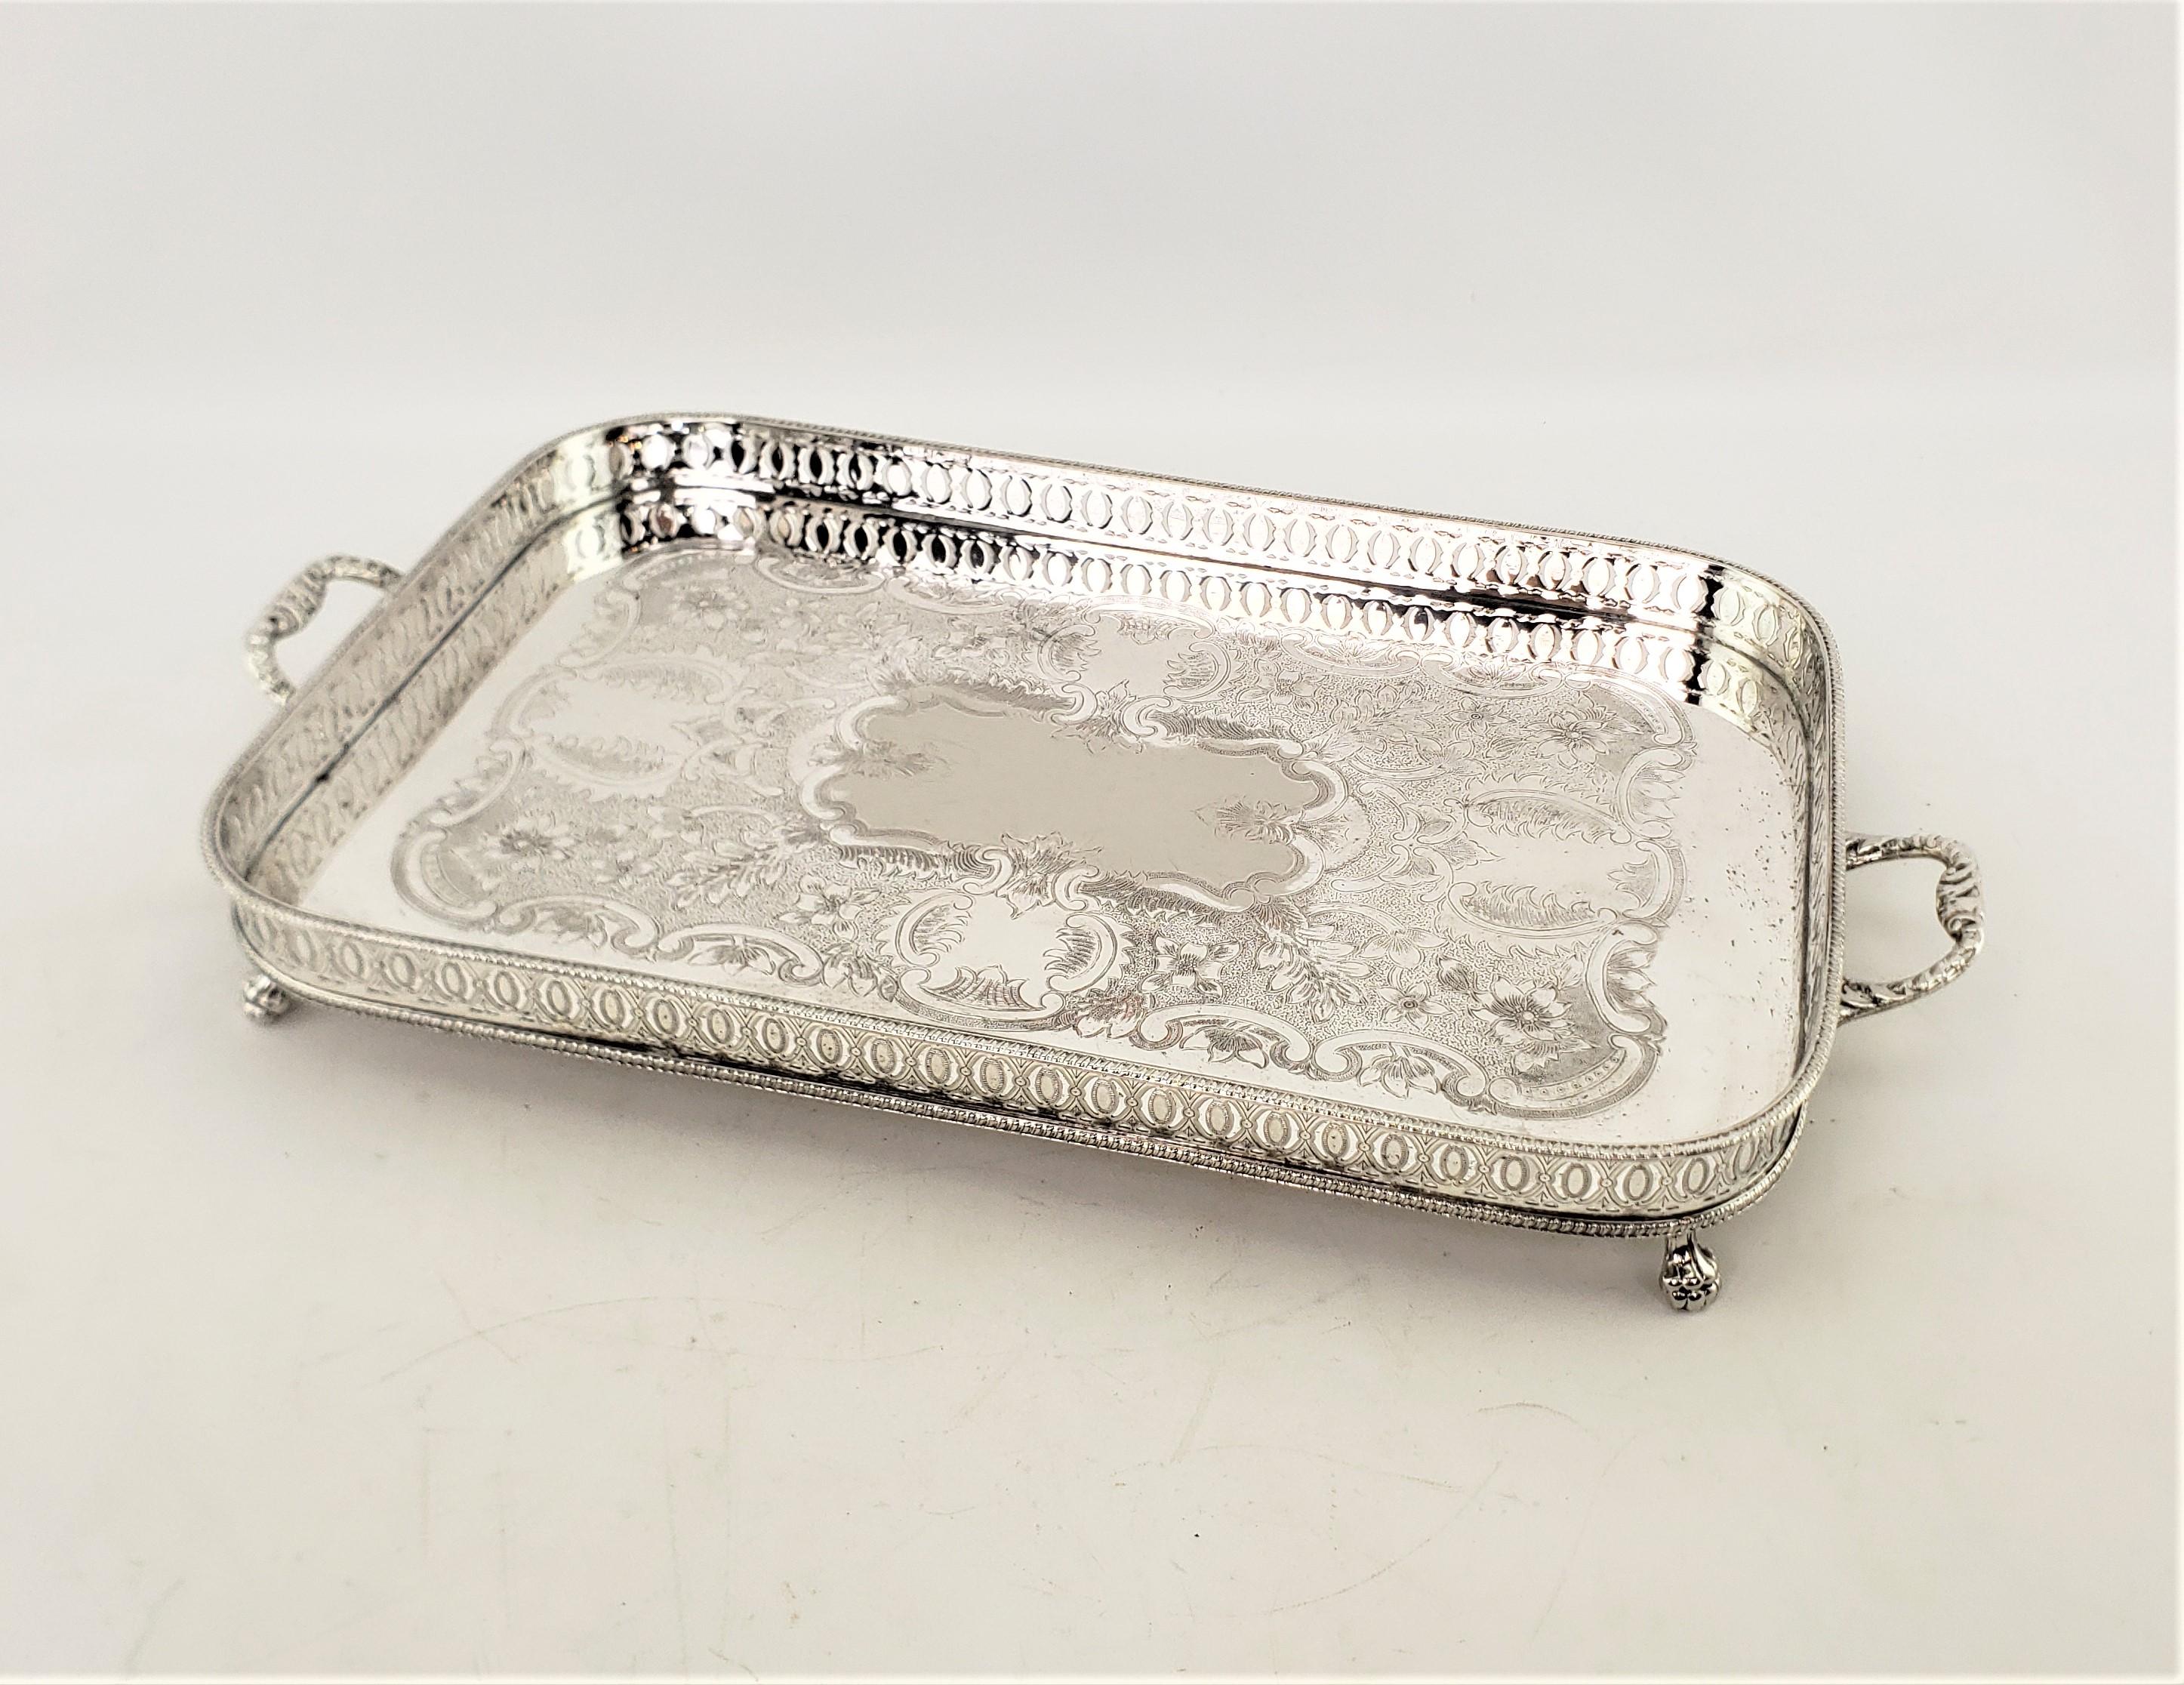 This antique serving tray was made by an unkwown maker and presumed to have originated from England and date to approximately 1920 and done in a period Art Deco style. This rectangular shaped tray is done in silver plate and features a pierced